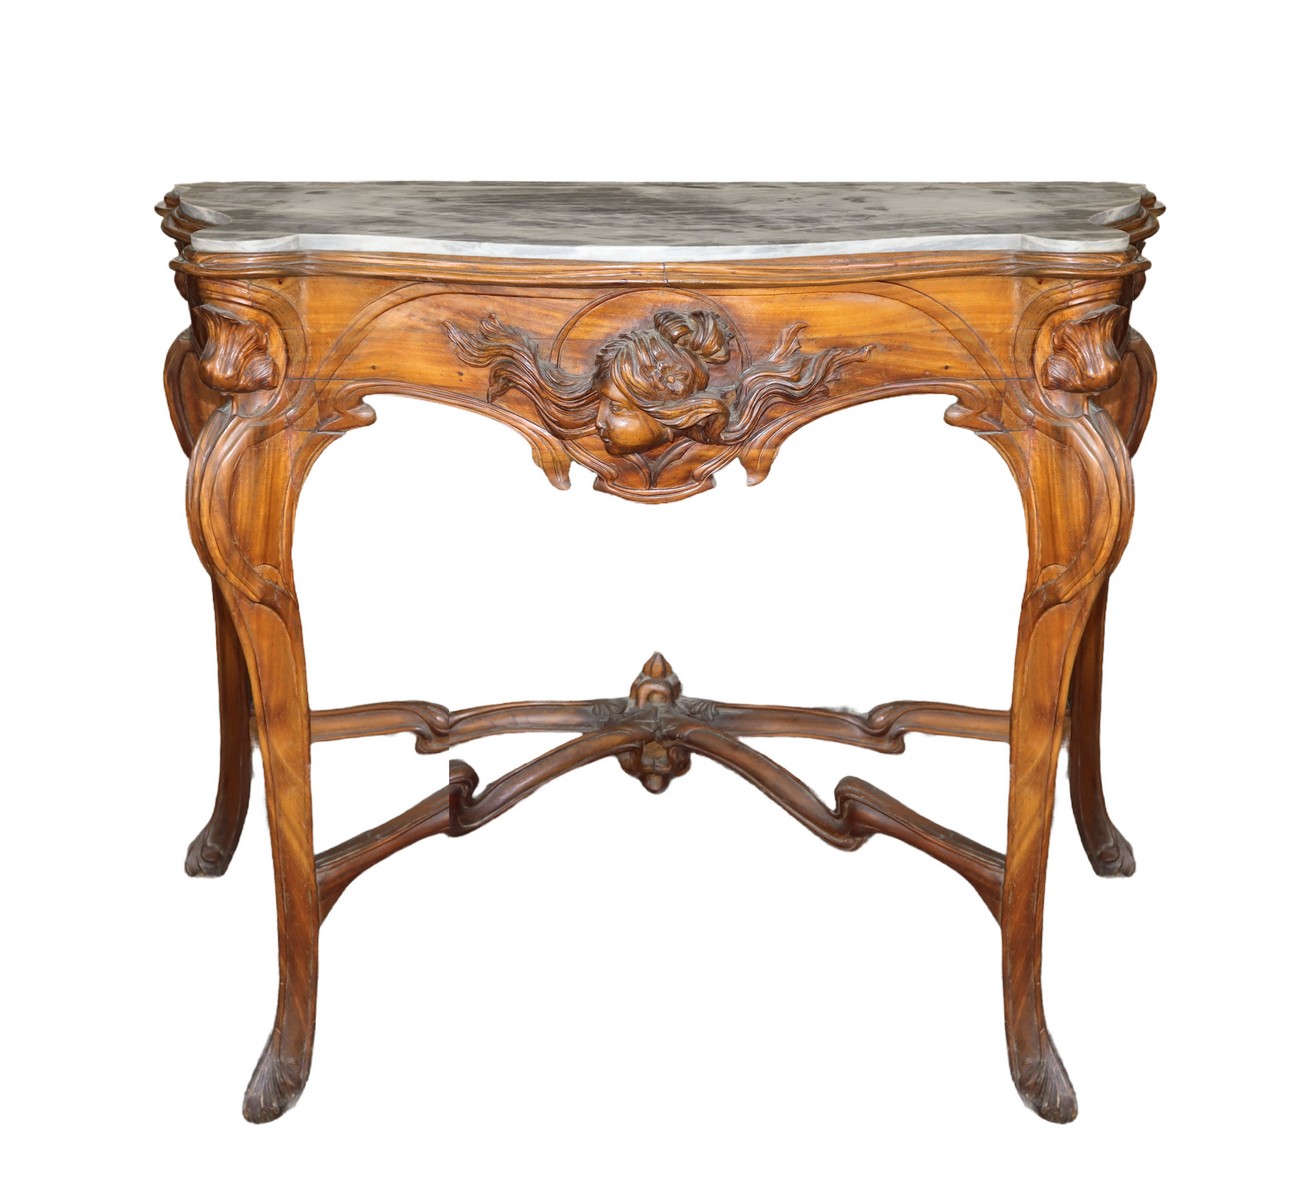 Liberty console in walnut wood, bardiglio gray marble on the top, Early 20th century